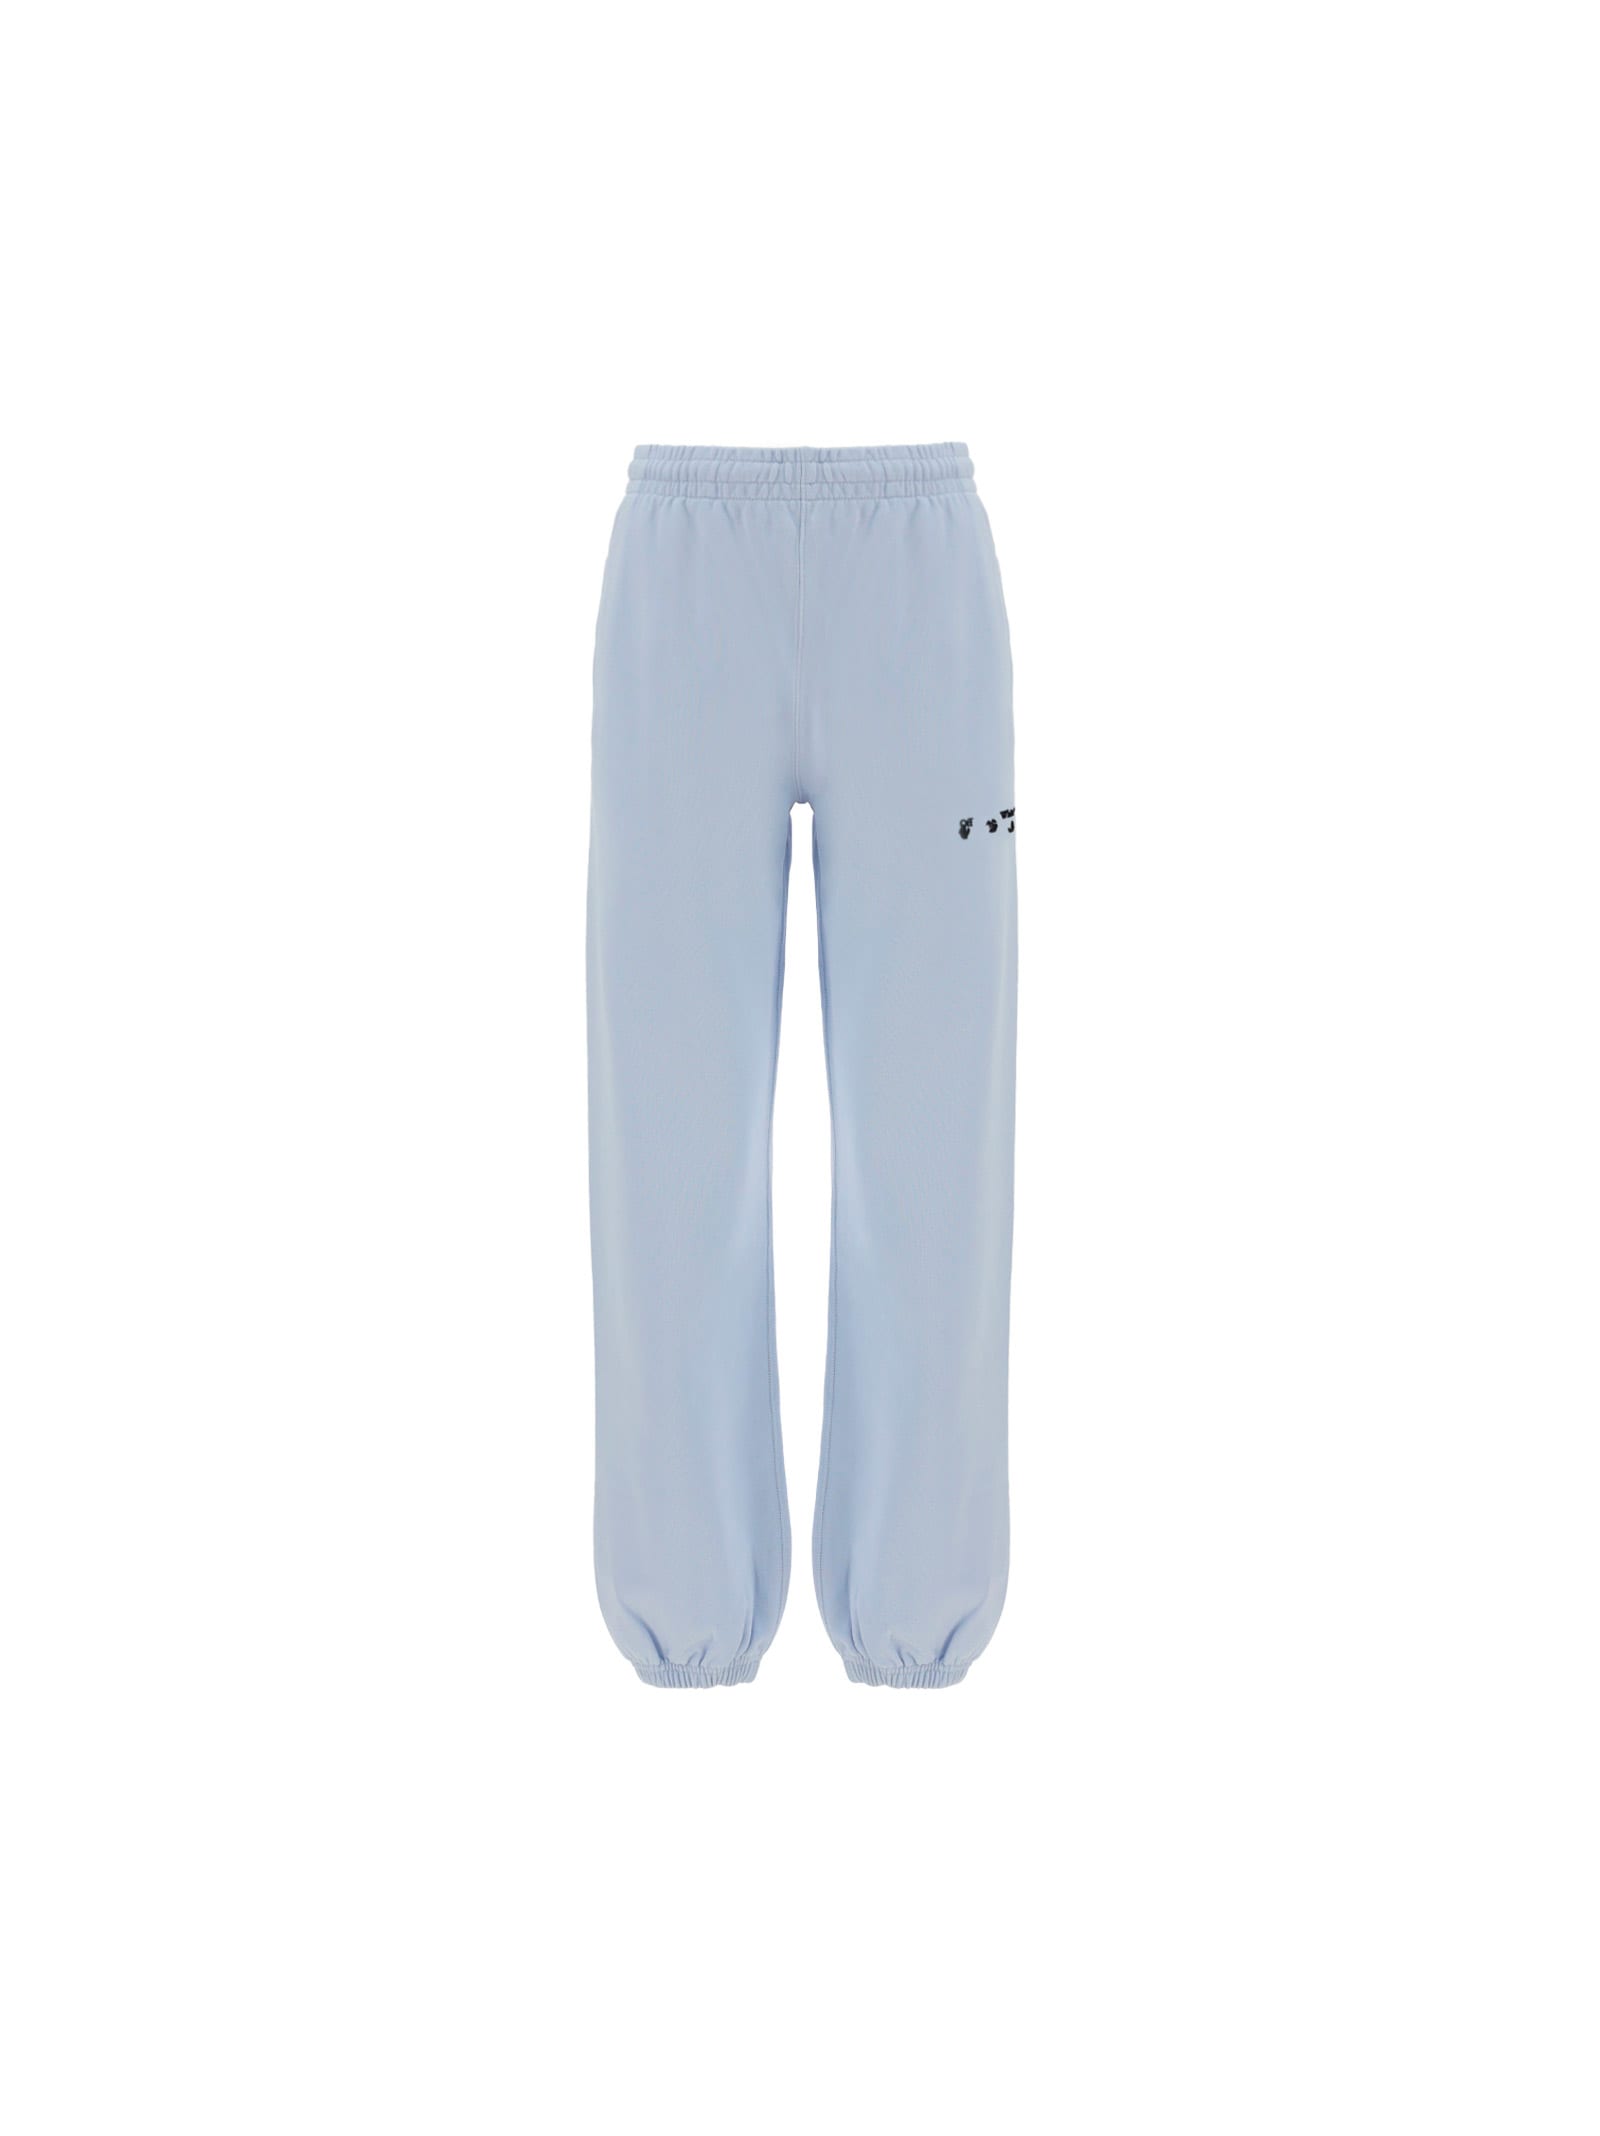 OFF-WHITE OFF WHITE SWEATPANTS,OWCH006S21JER001 3610